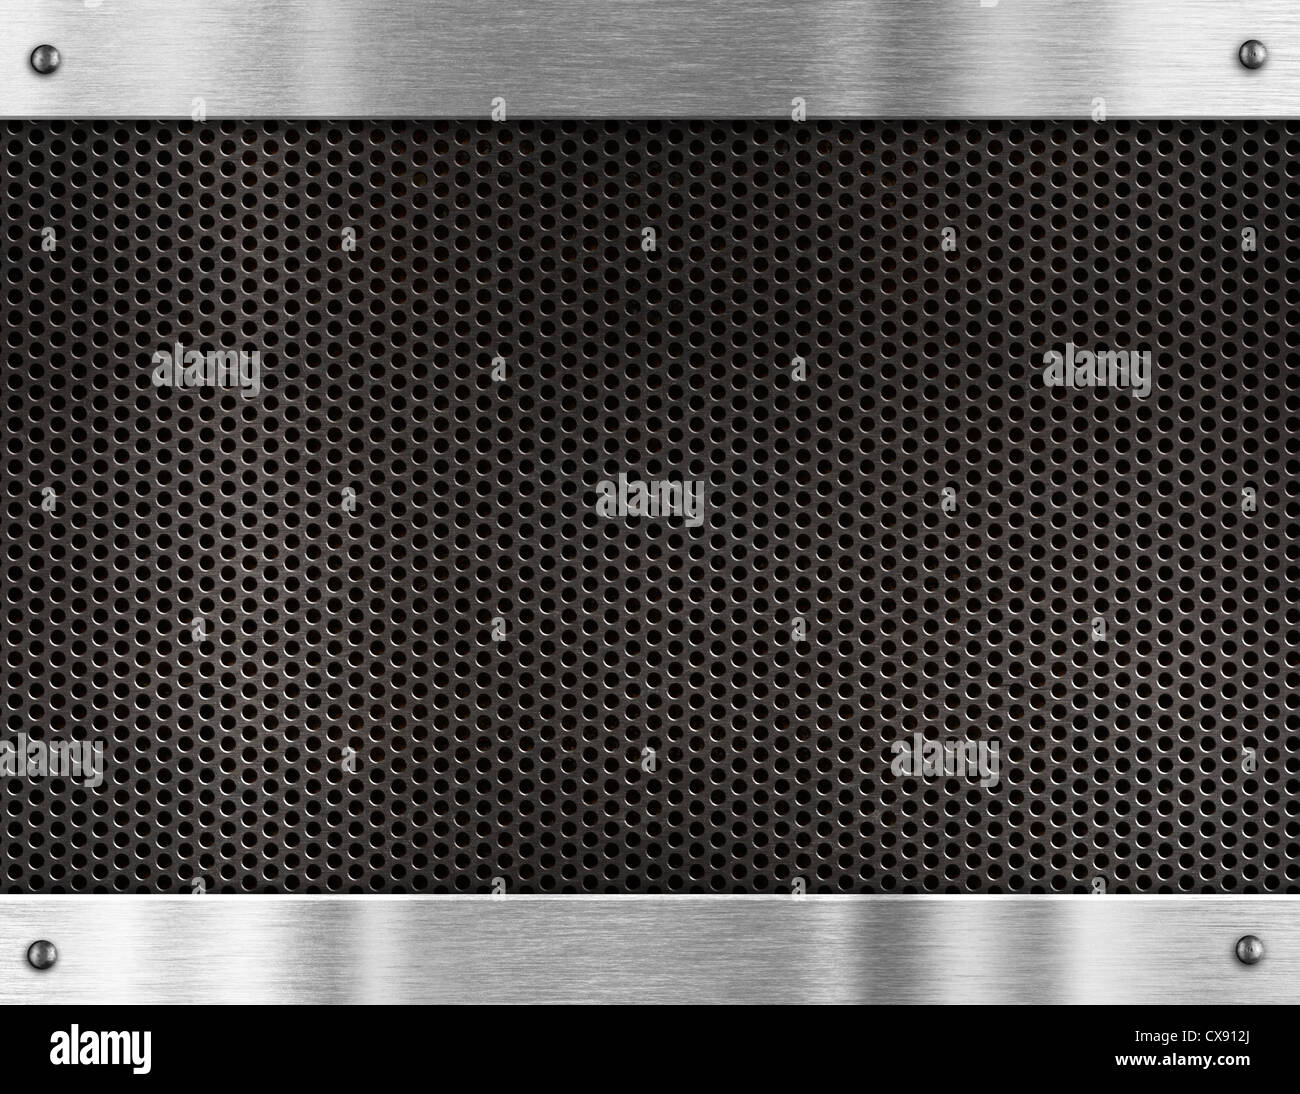 metal grate background Stock Photo